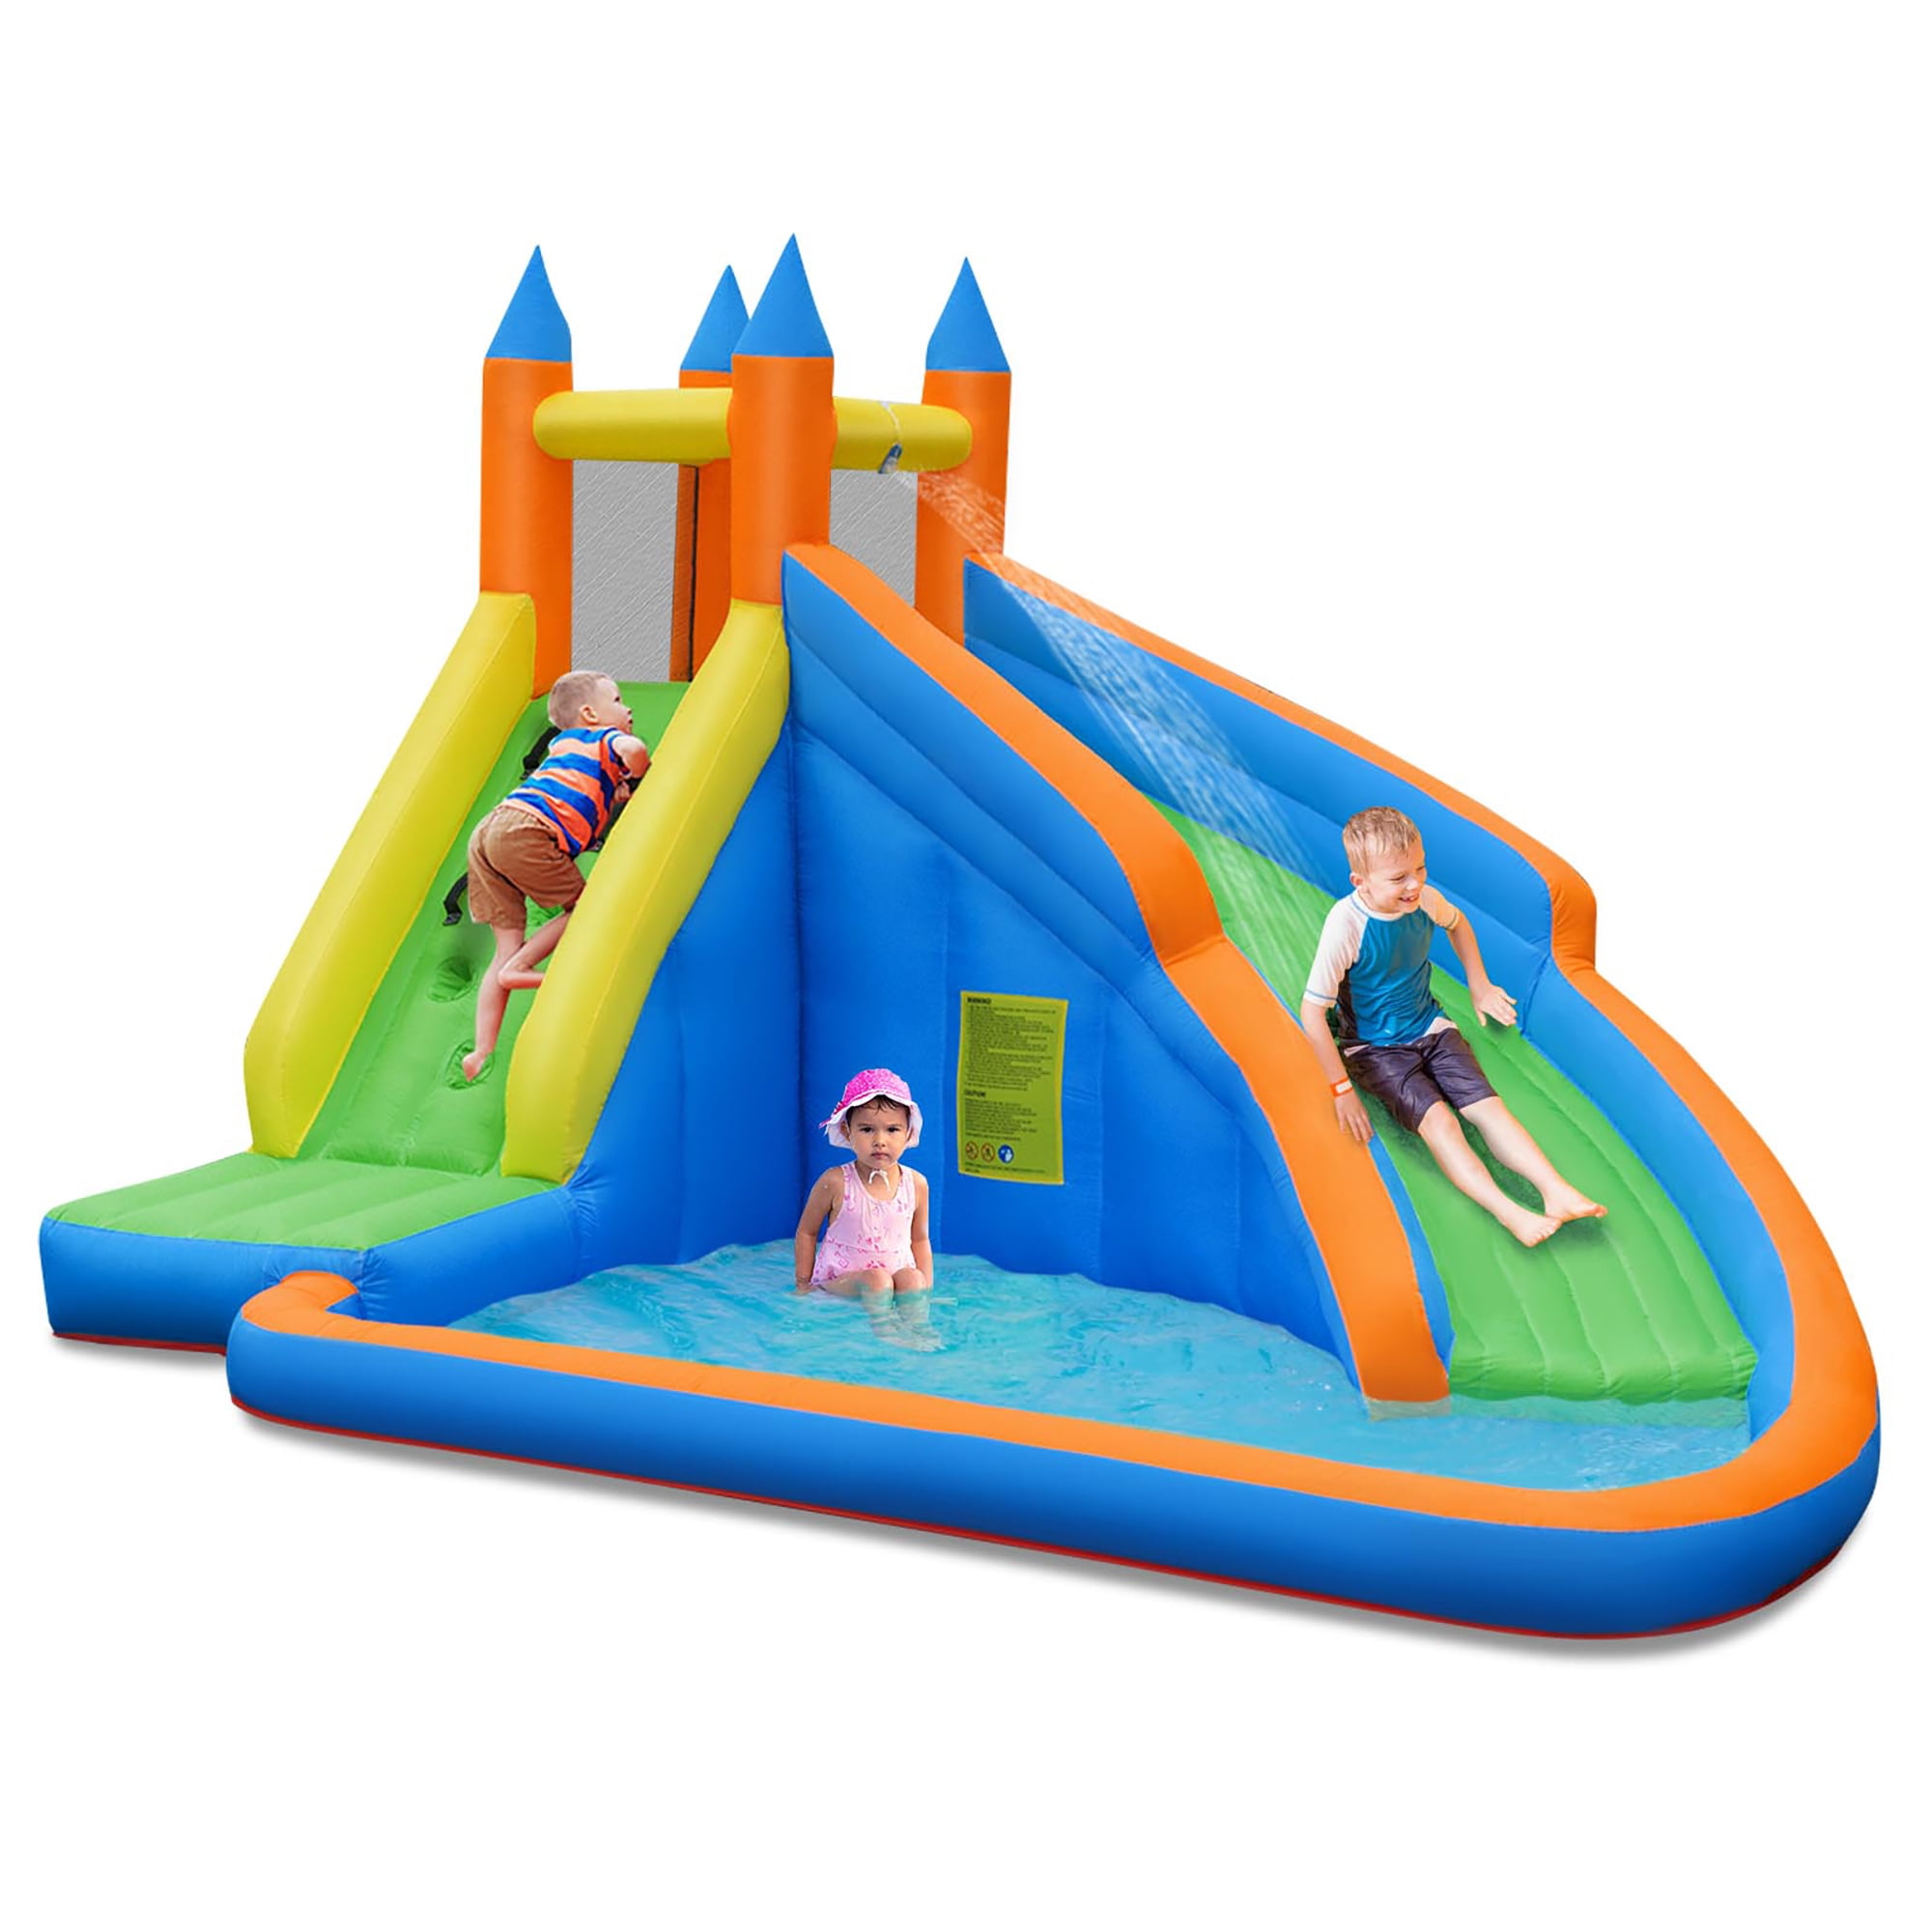 Climbing Wall Splash Pool Big Kids Bouncy Castle for Outdoor Indoor Party Toddler Backyard Playhouse Including Blower Step4Fun Inflatable Bounce House Water Slides